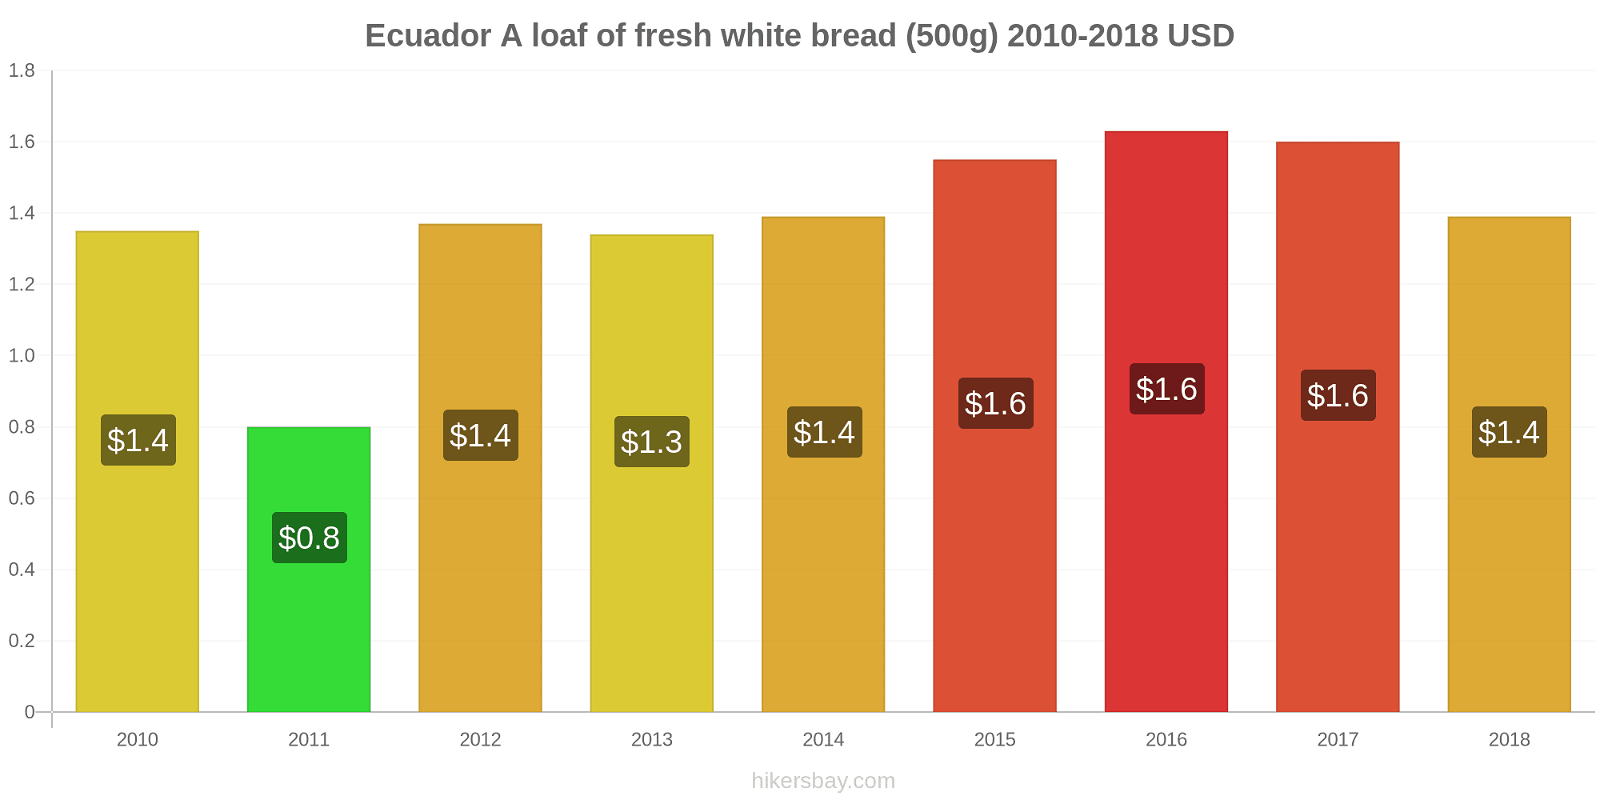 Ecuador price changes A loaf of fresh white bread (500g) hikersbay.com